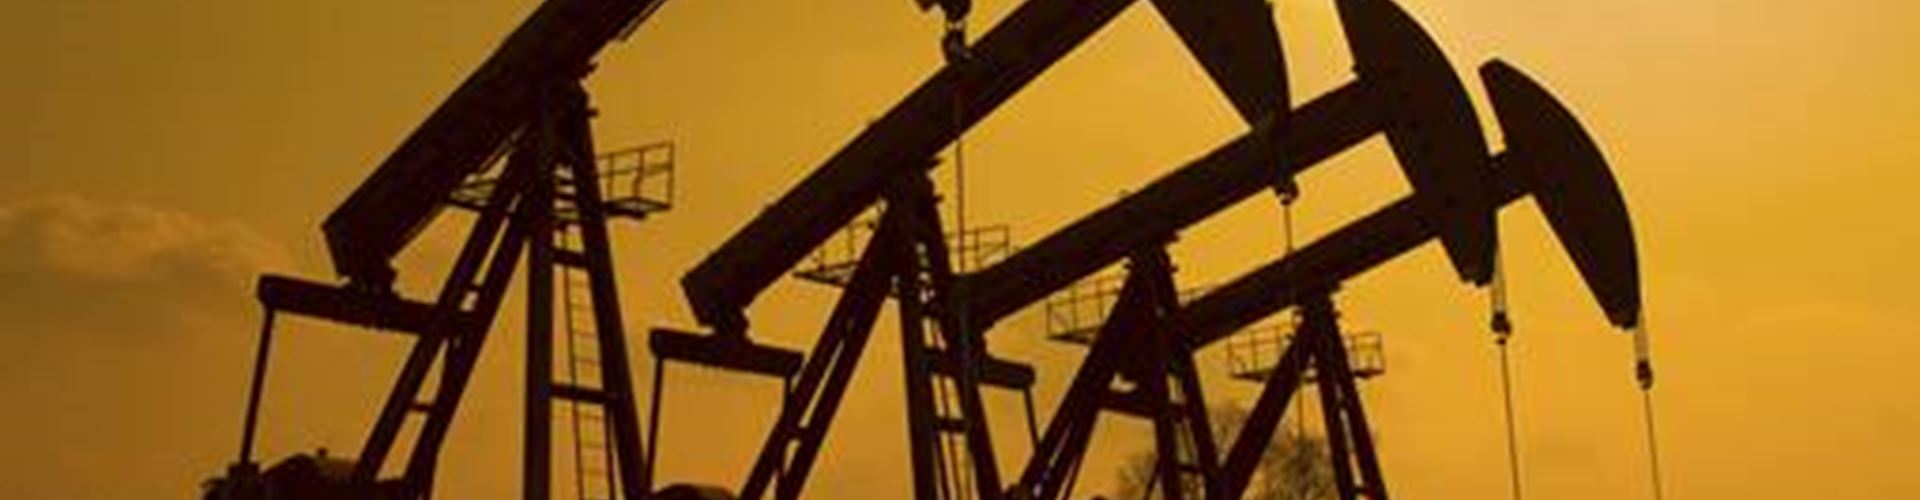 New study on oil and gas industry released